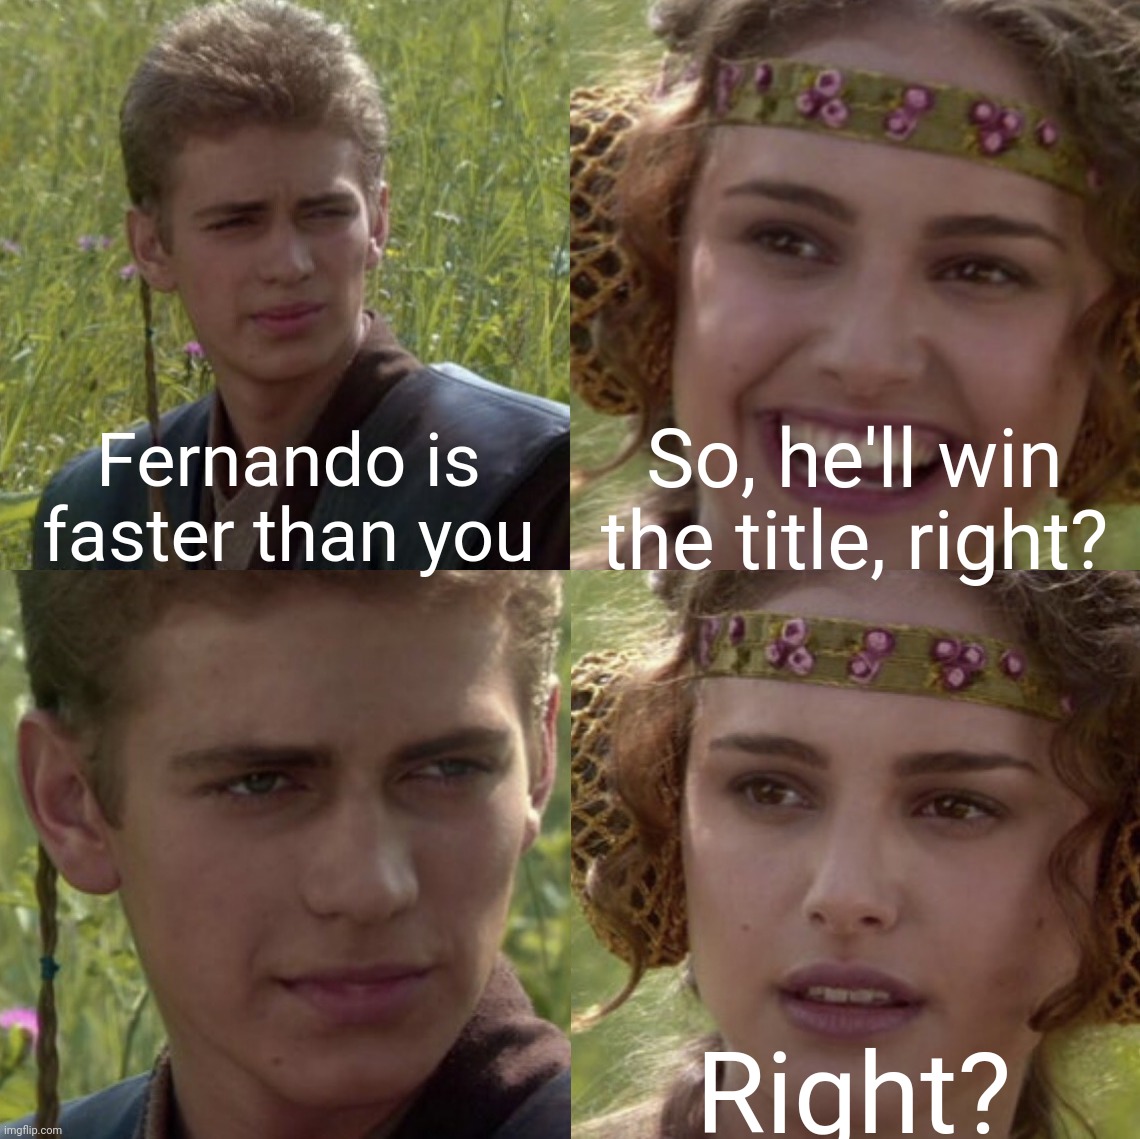 For the better right blank | So, he'll win the title, right? Fernando is faster than you; Right? | image tagged in for the better right blank,formula 1 | made w/ Imgflip meme maker